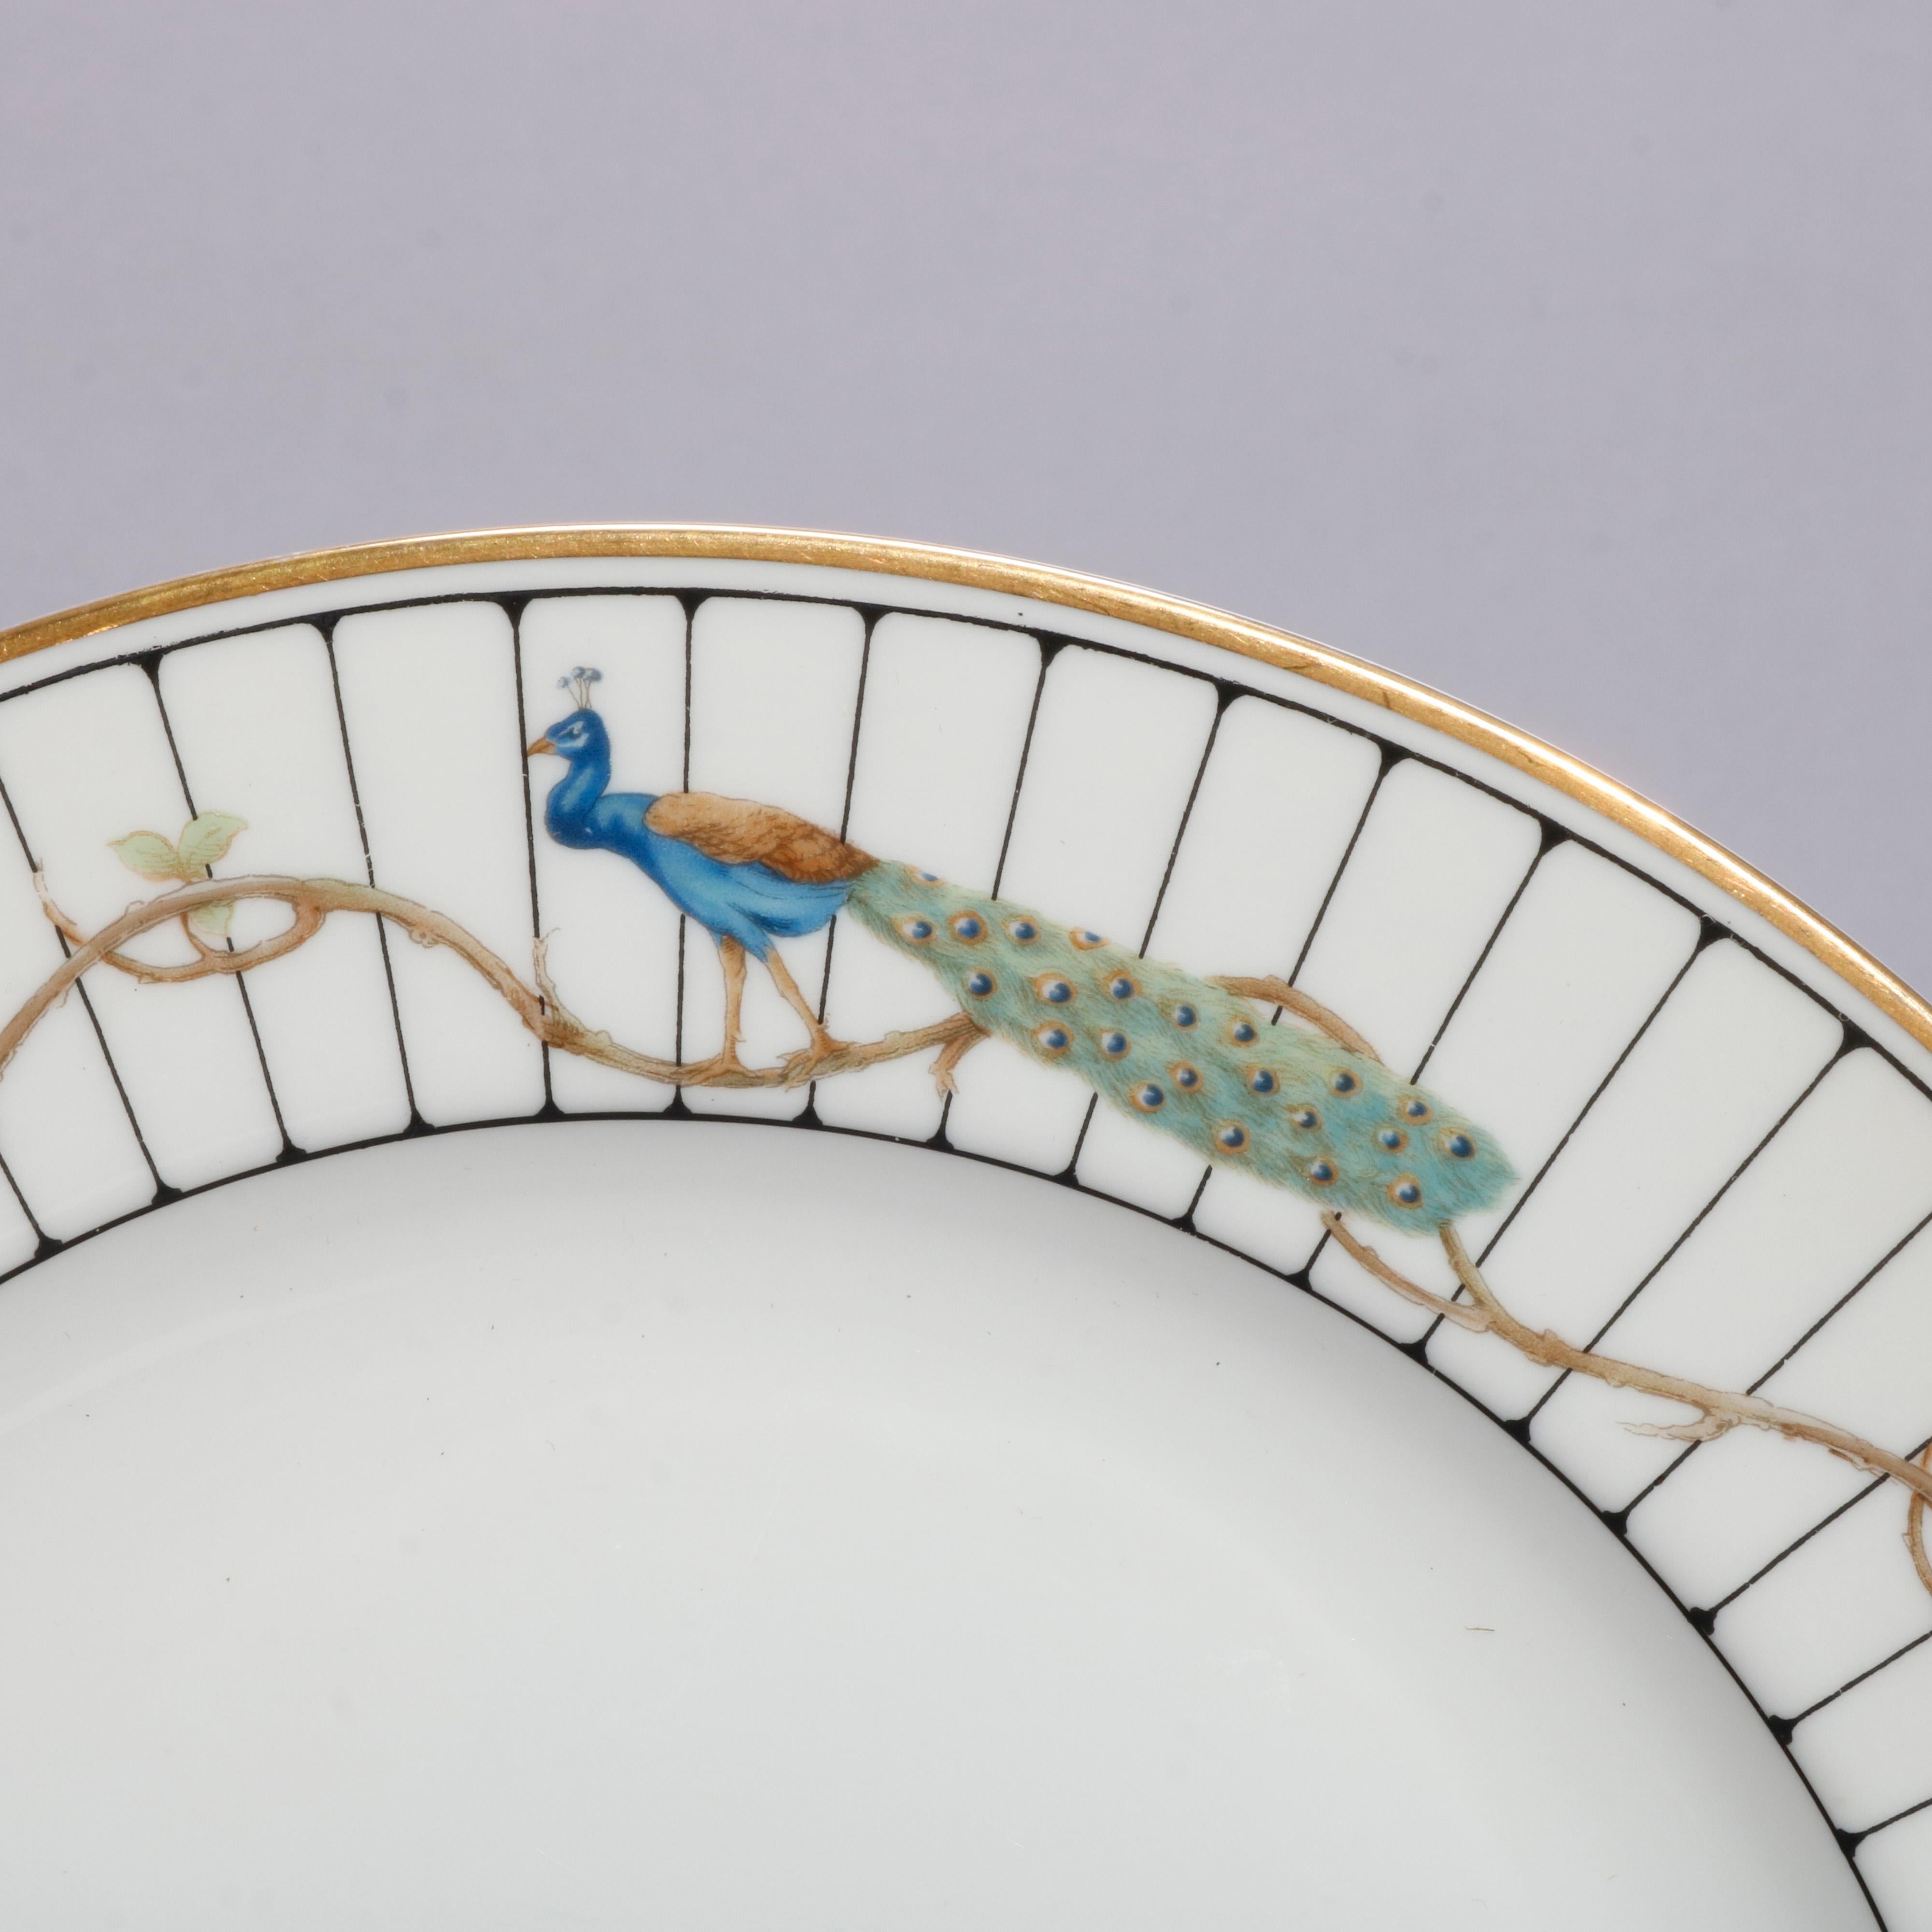 A vintage set of 12 German fine China dinner plates by Rosenthal offer rims with peacocks and gilt trim, en verso maker mark, 20th century

Measures: .75